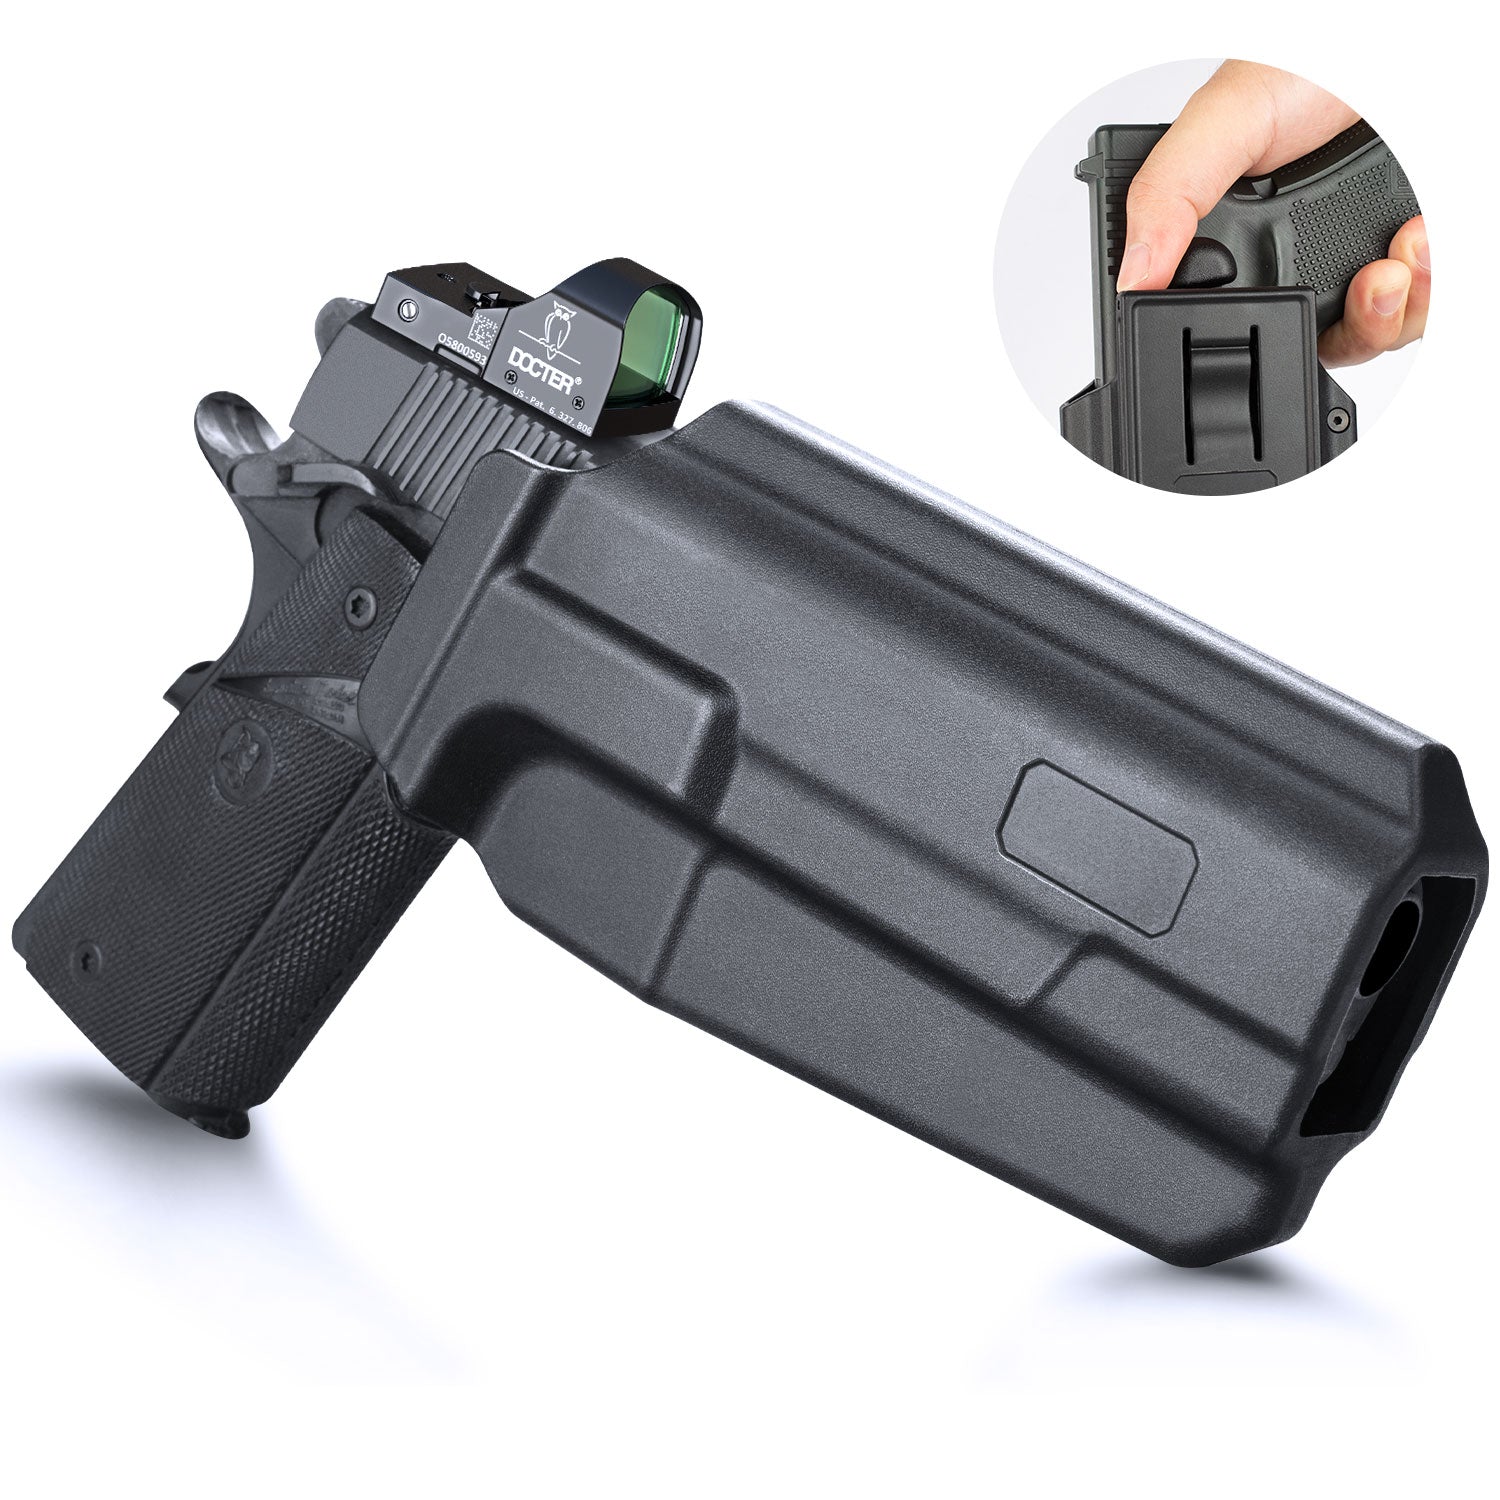 l Thumb Release OWB Holster with Optic Cut for 1911 .45 ACP Pistol